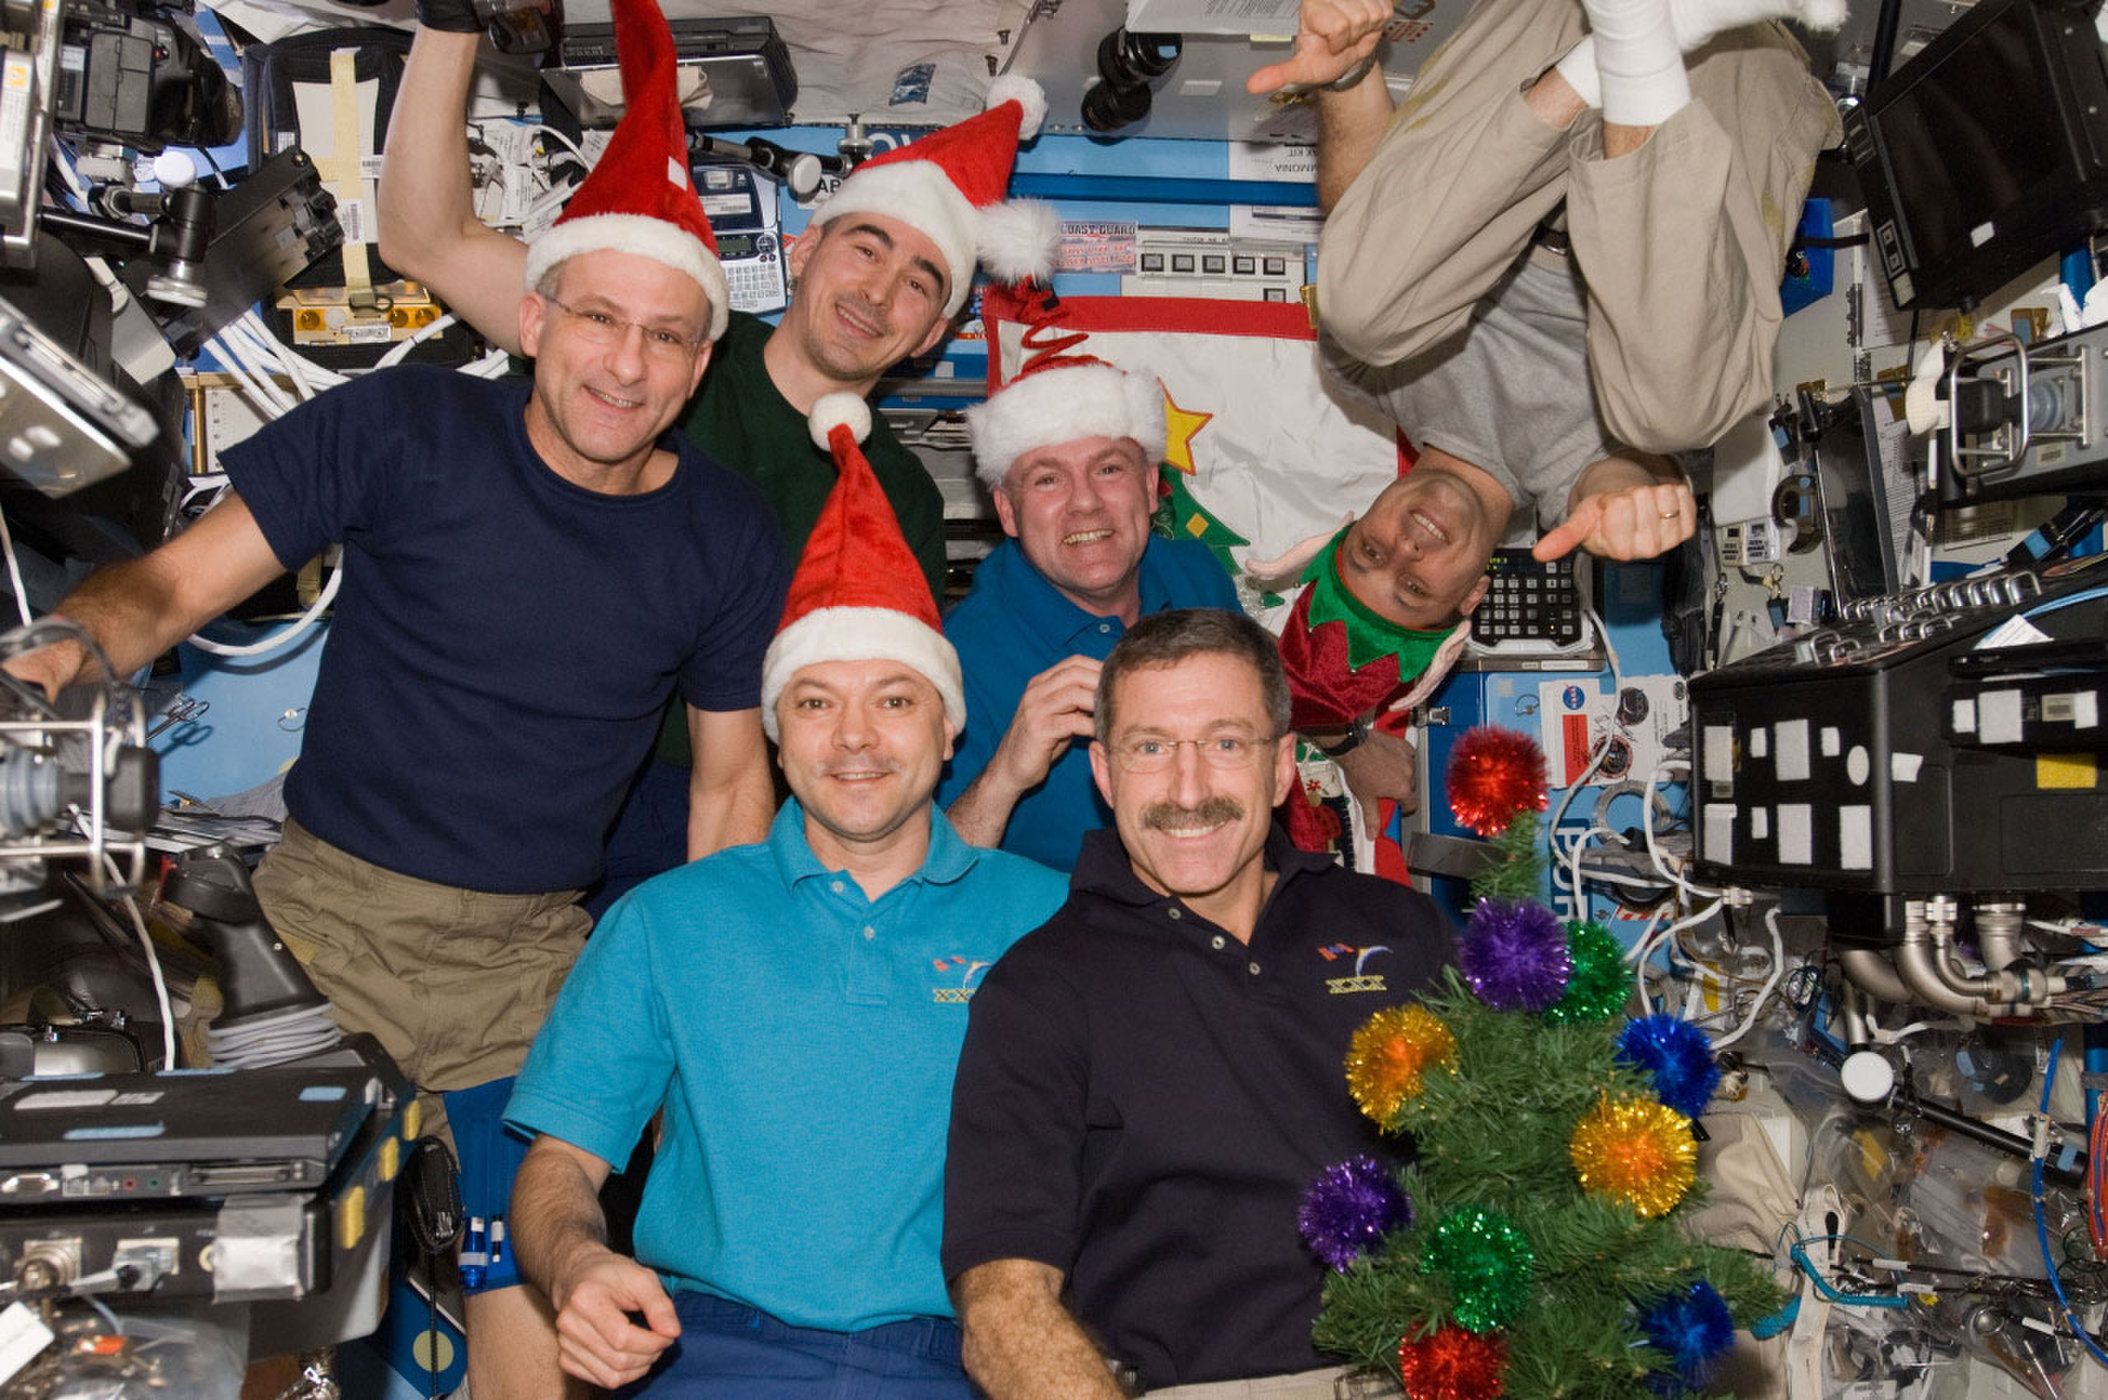 Christmas at the Space Station: Astronauts Celebrate with New Tree, Gifts from Earth